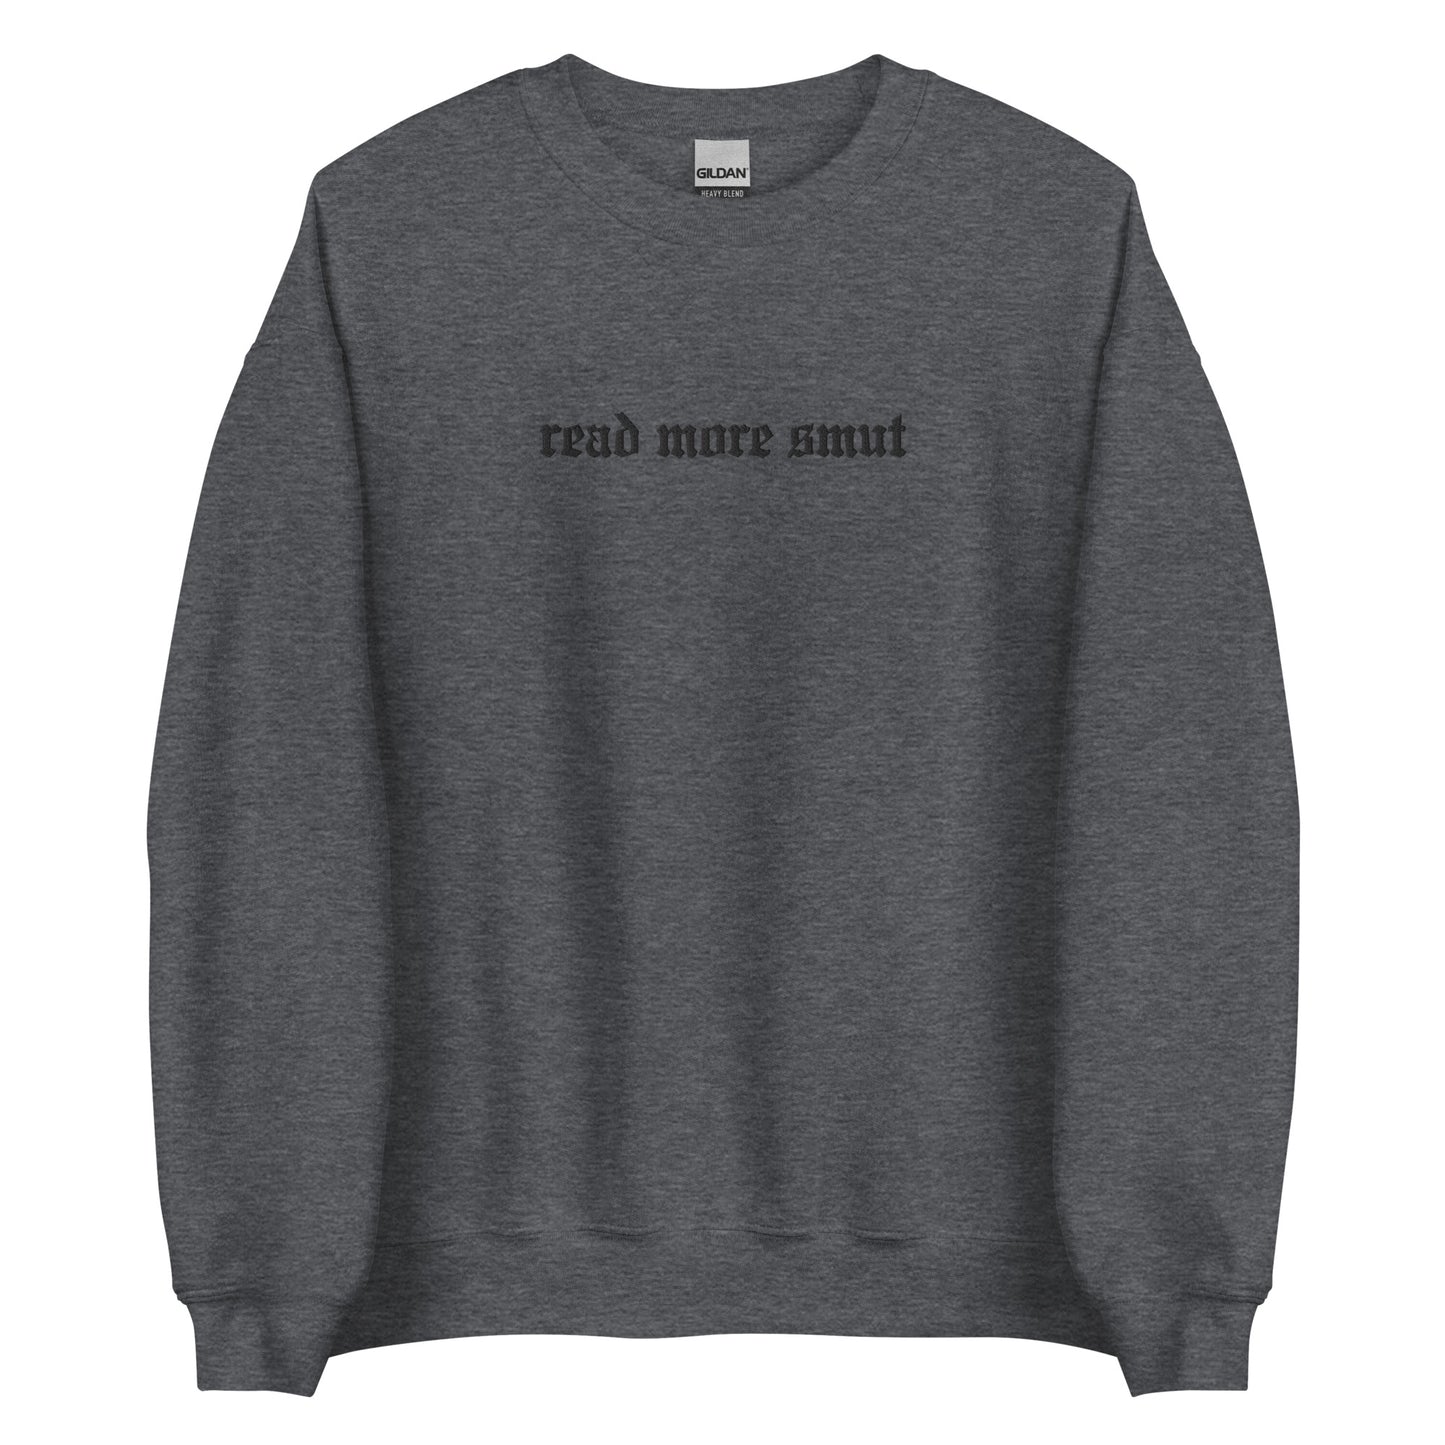 read more smut embroidered sweatshirt